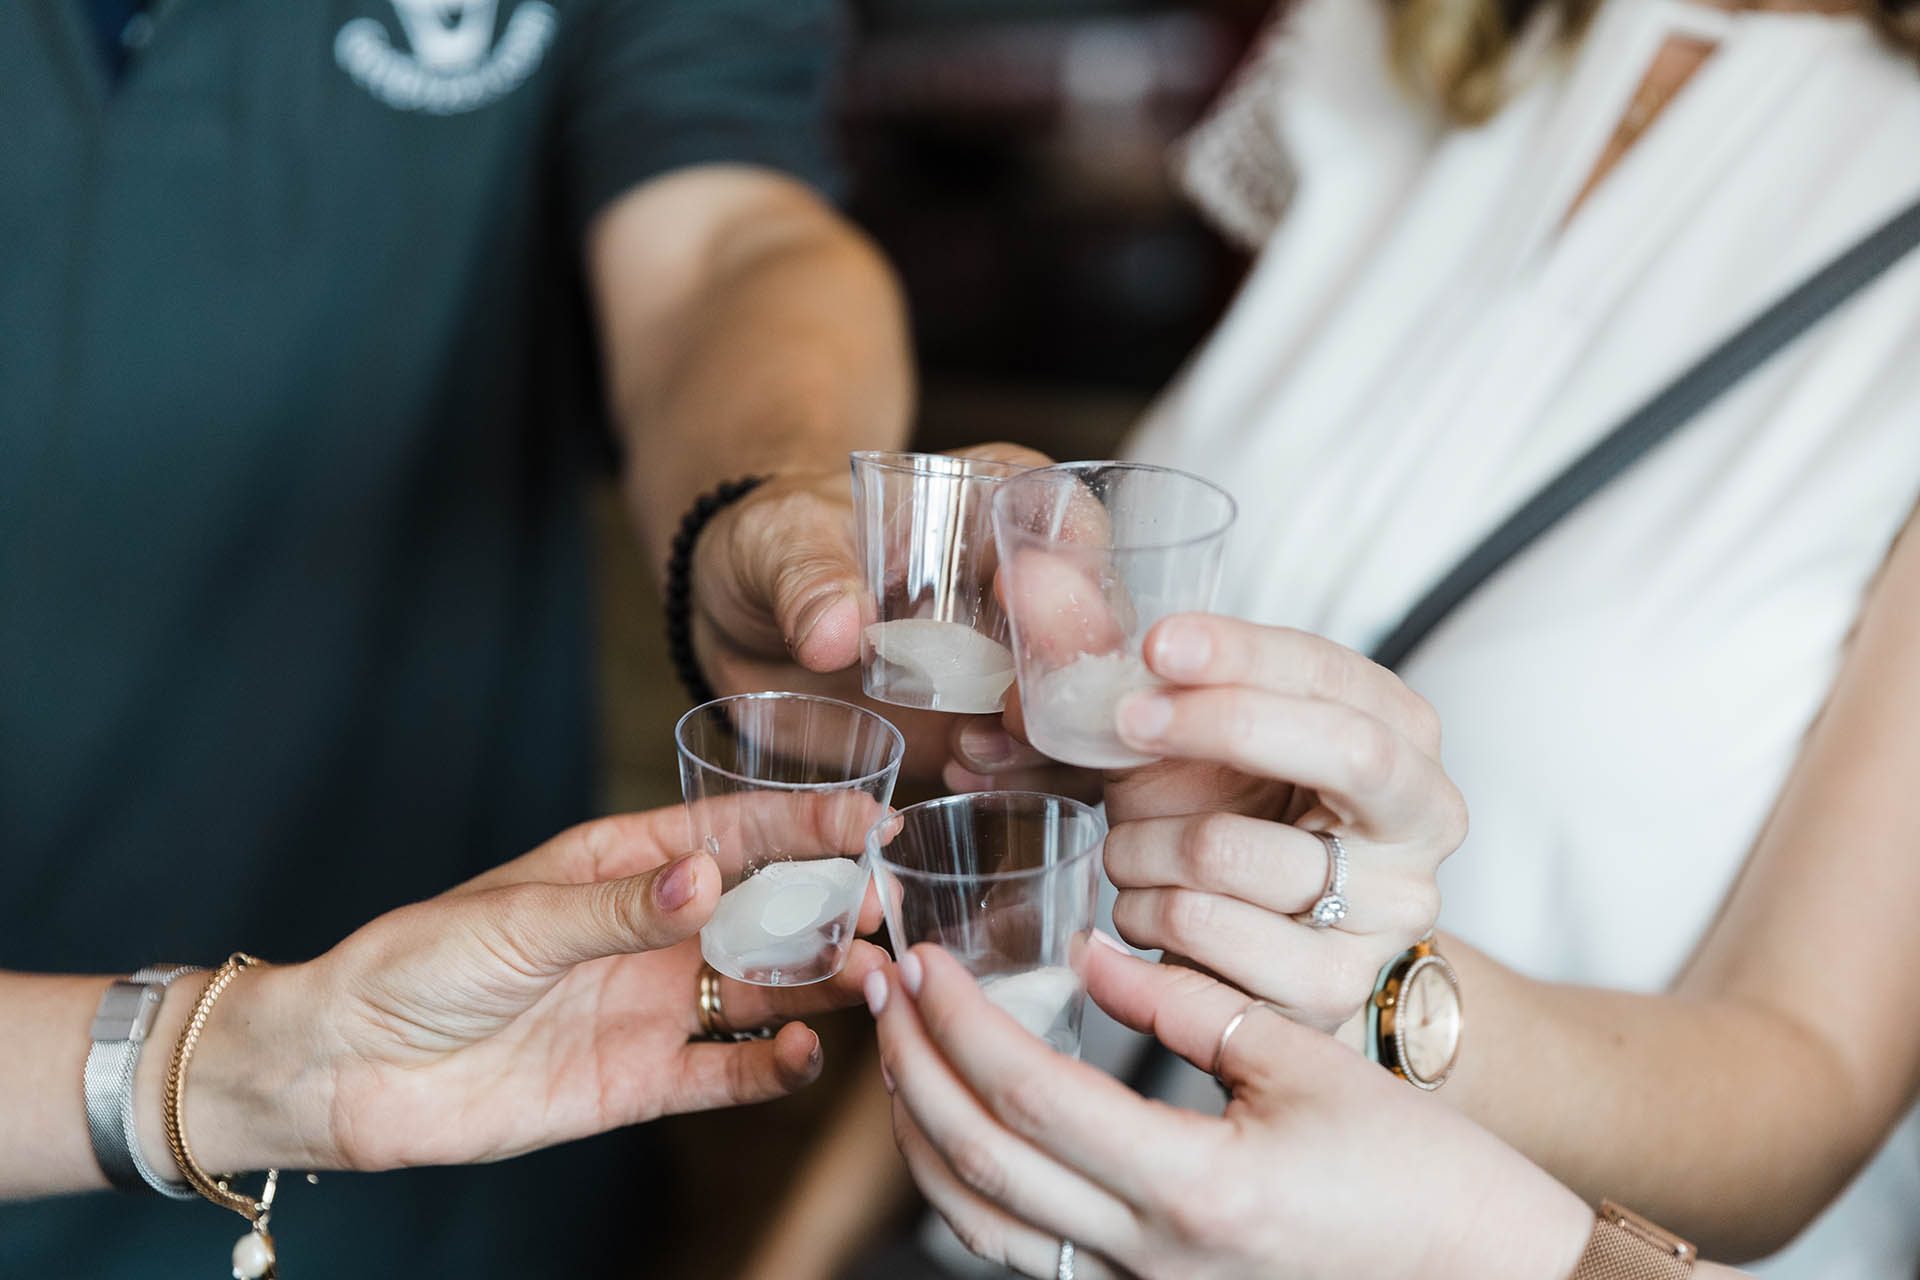 Fun Dallas event detail photo of four shot glasses being clinked together for a cheers.